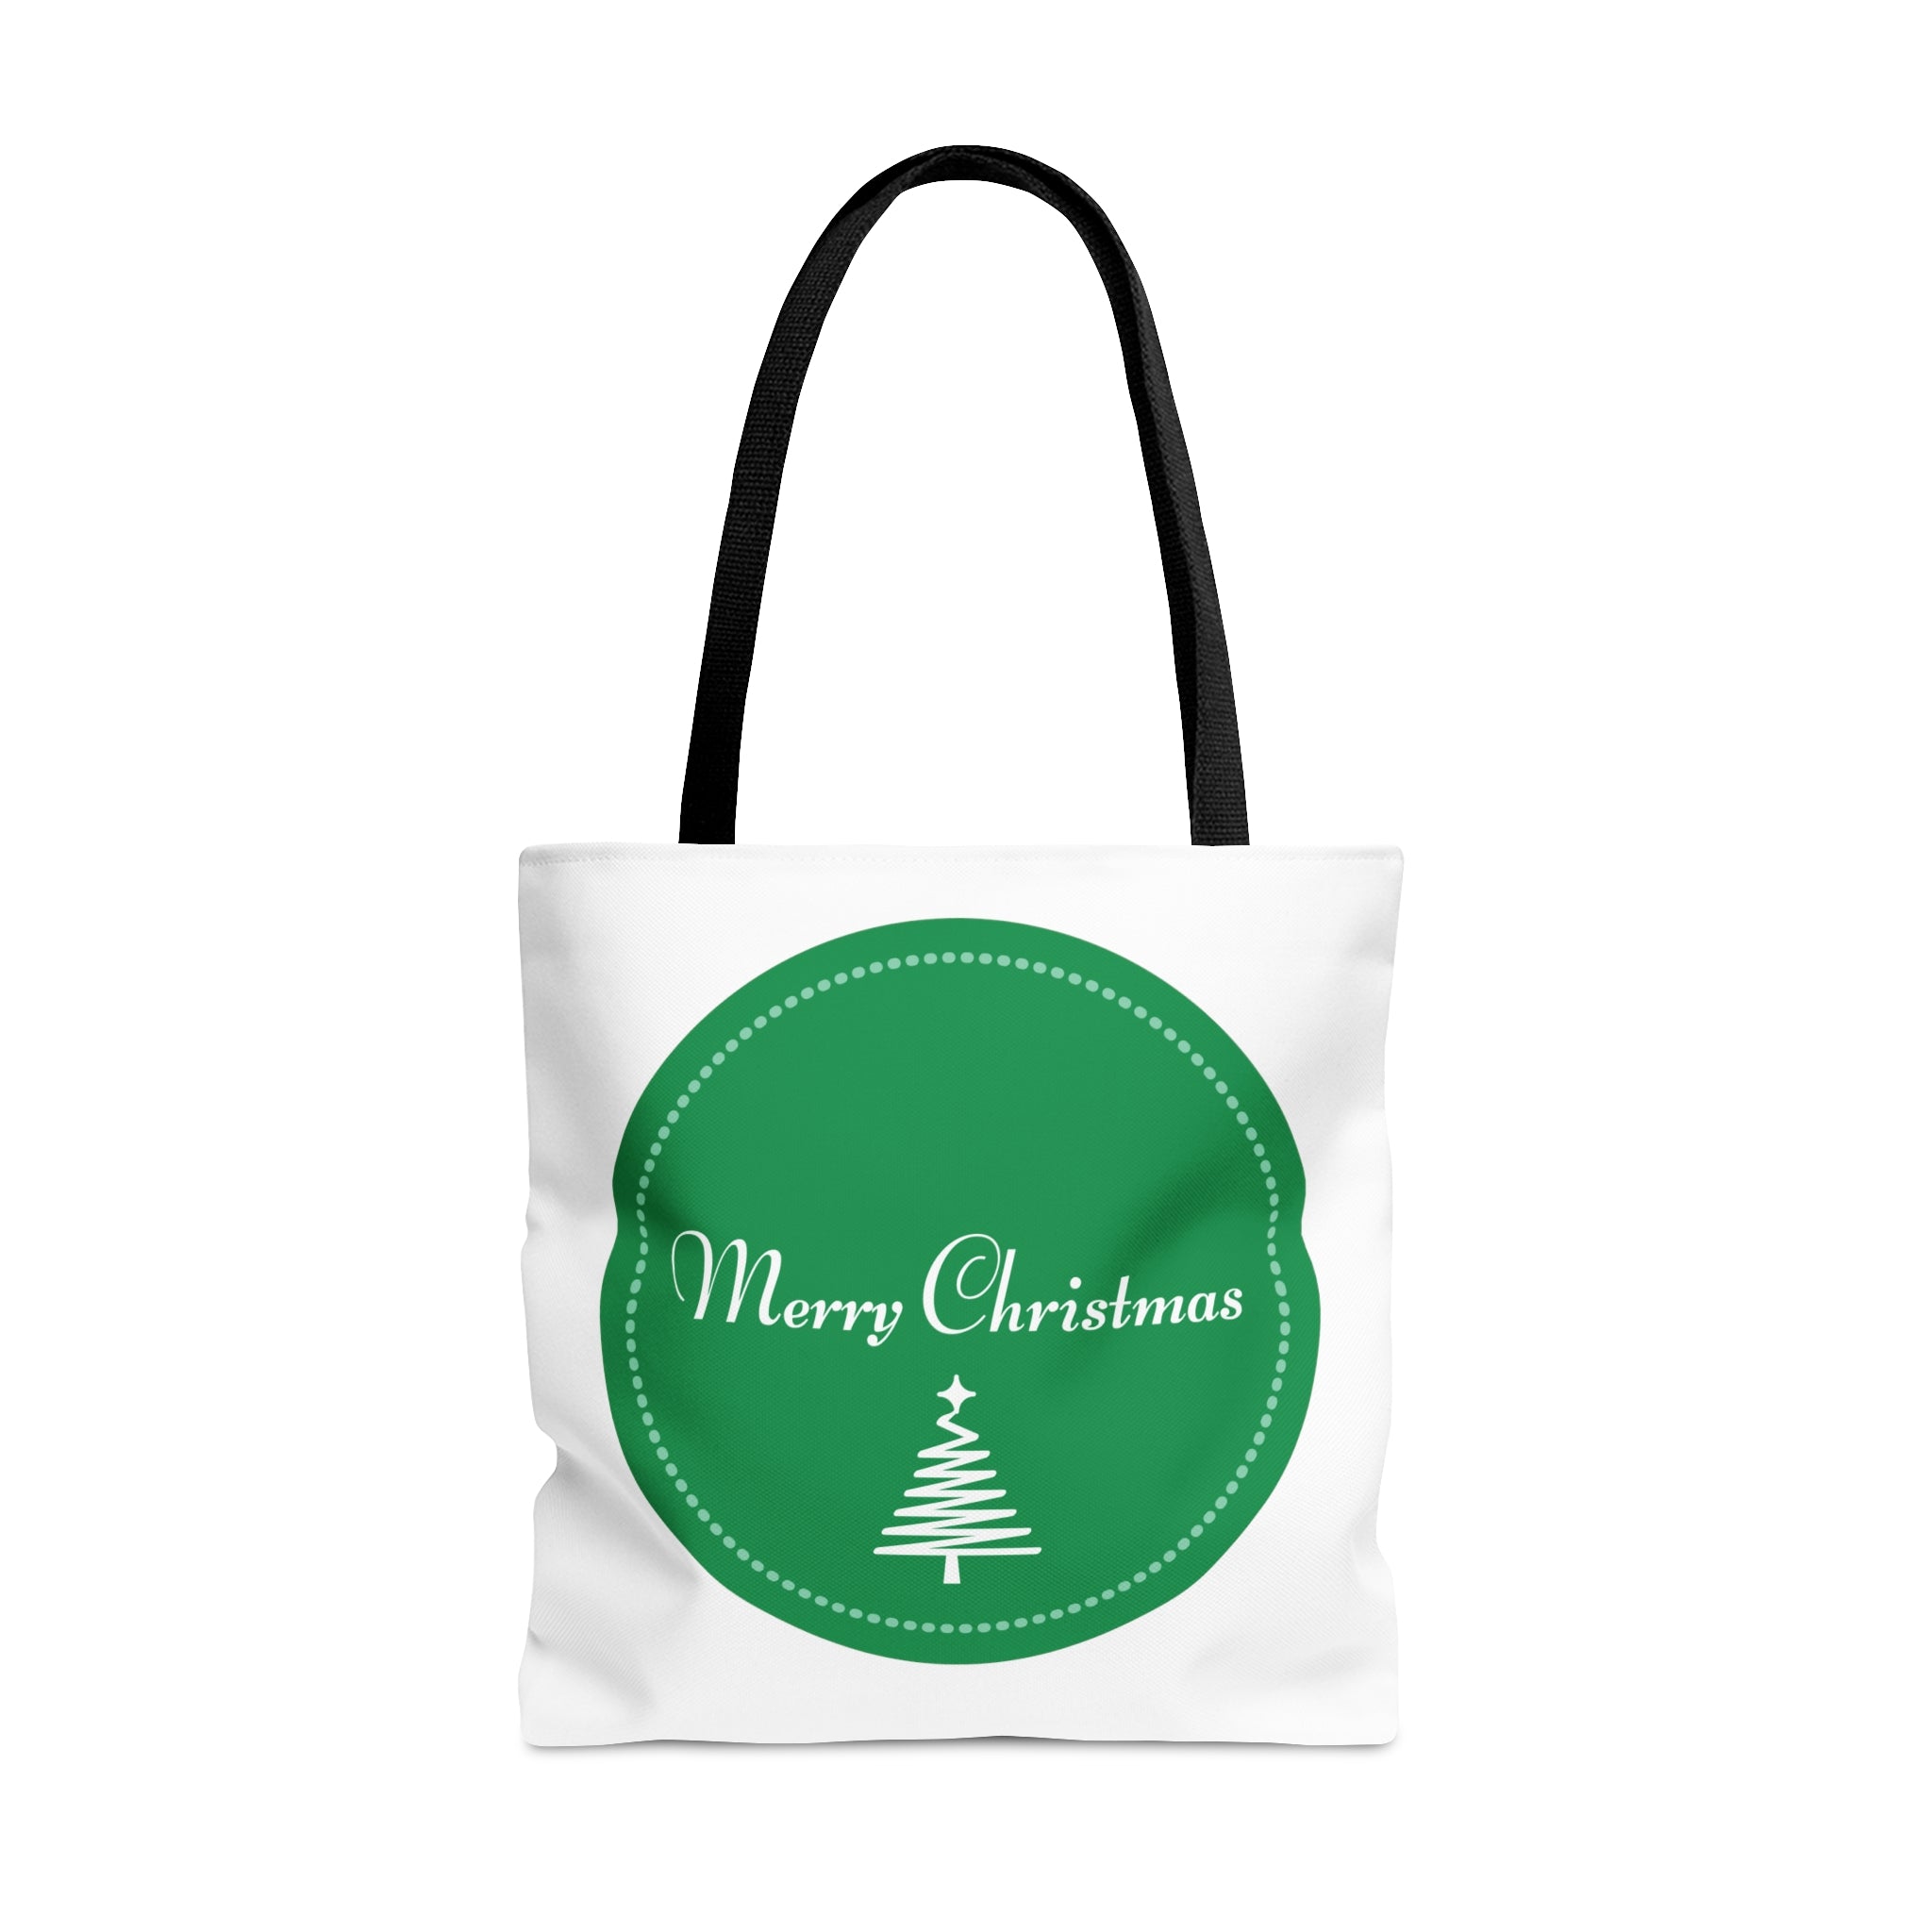 Merry Christmas Tote Bags Green, Reusable Canvas Tote Bags, Available in Different Size